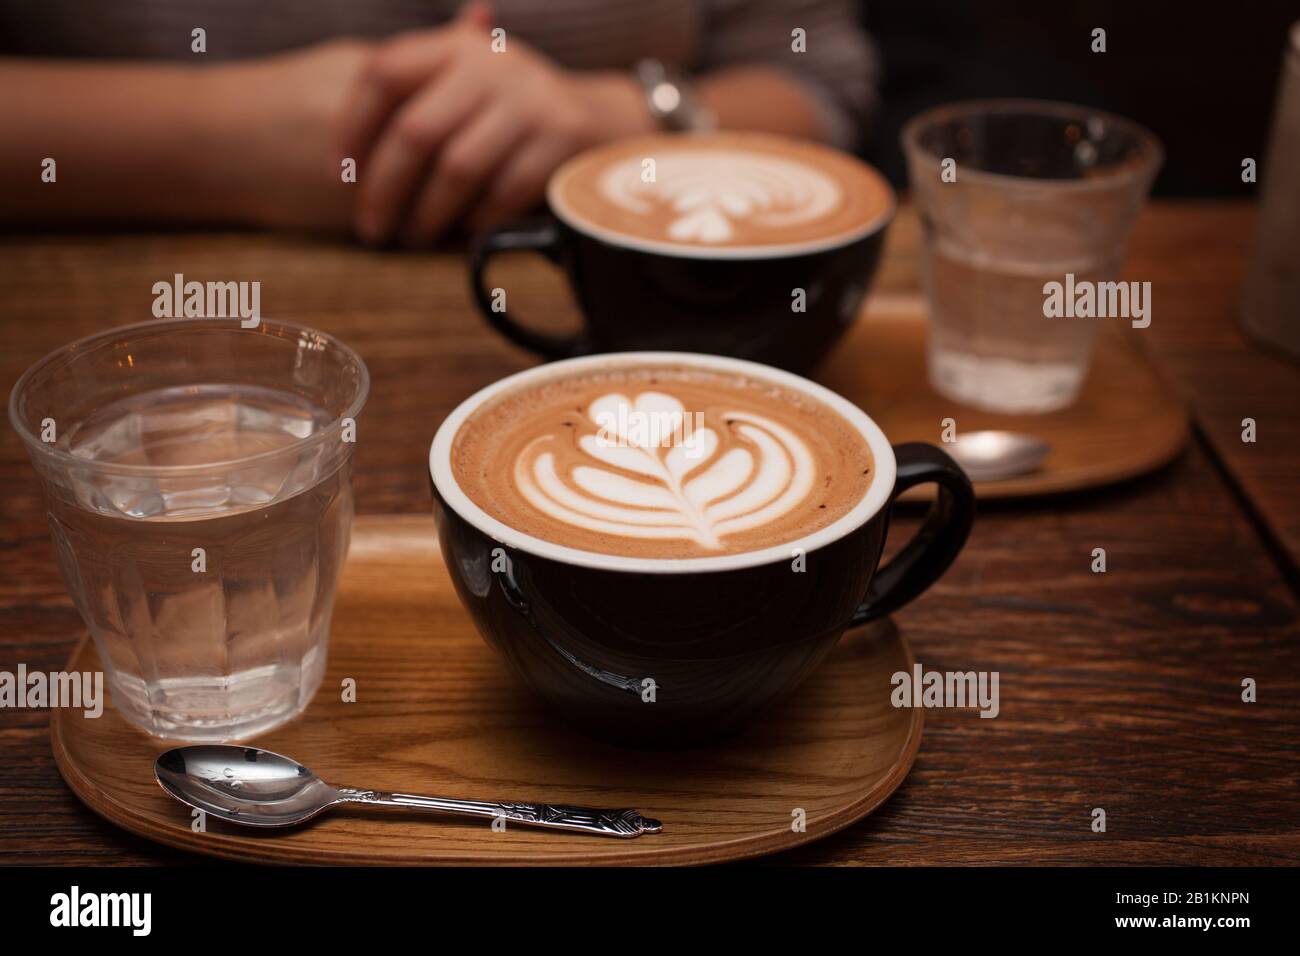 Two Mocha coffees with water served at a cafe Stock Photo